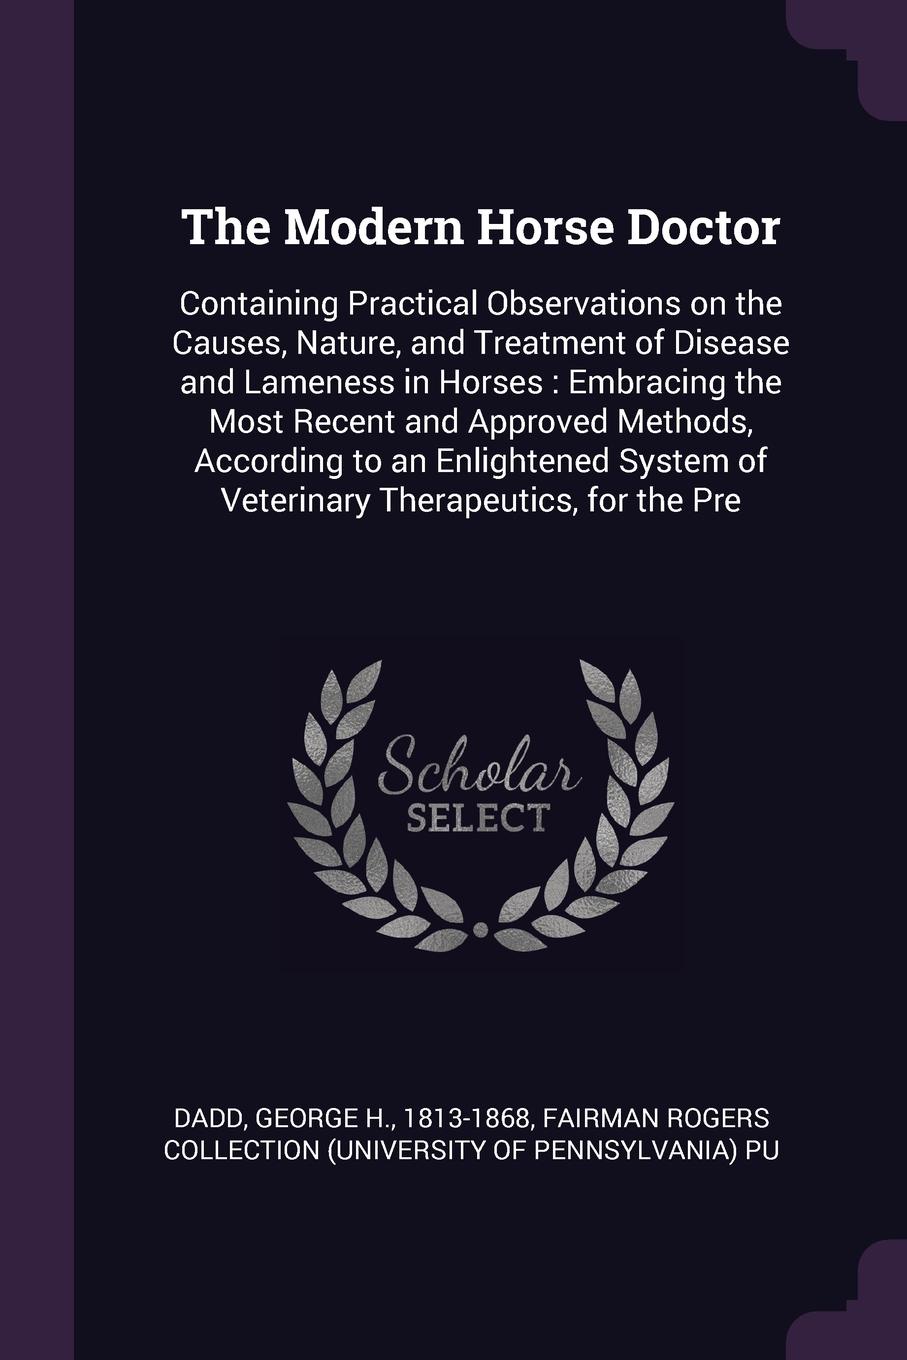 The Modern Horse Doctor. Containing Practical Observations on the Causes, Nature, and Treatment of Disease and Lameness in Horses : Embracing the Most Recent and Approved Methods, According to an Enlightened System of Veterinary Therapeutics, for ...